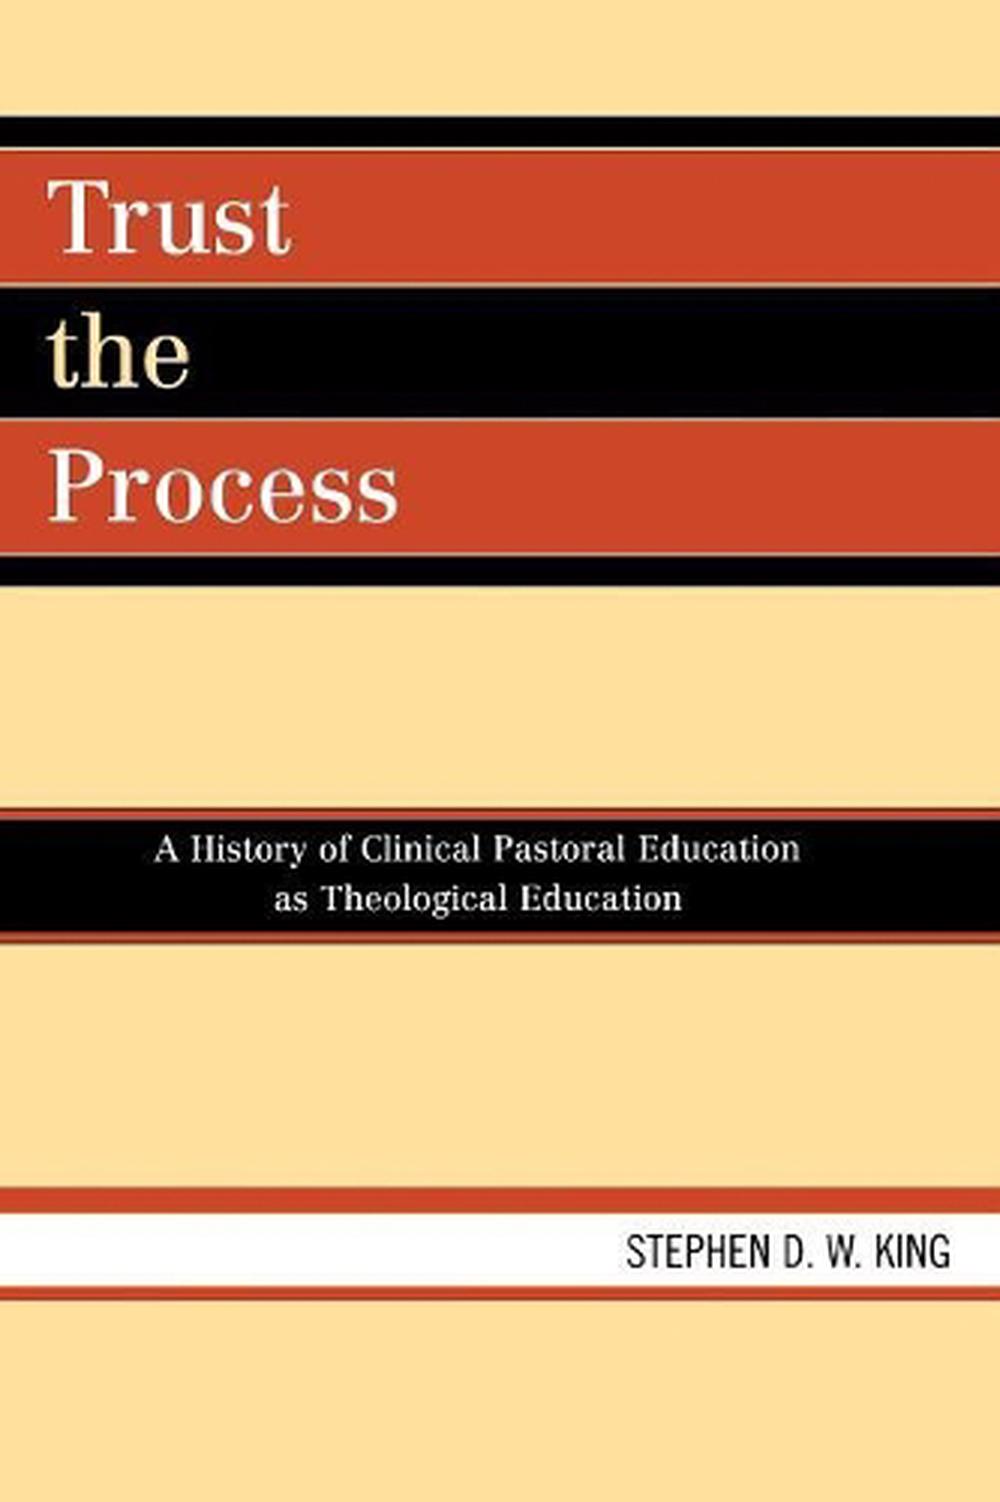 Trust the Process A History of Clinical Pastoral Education as